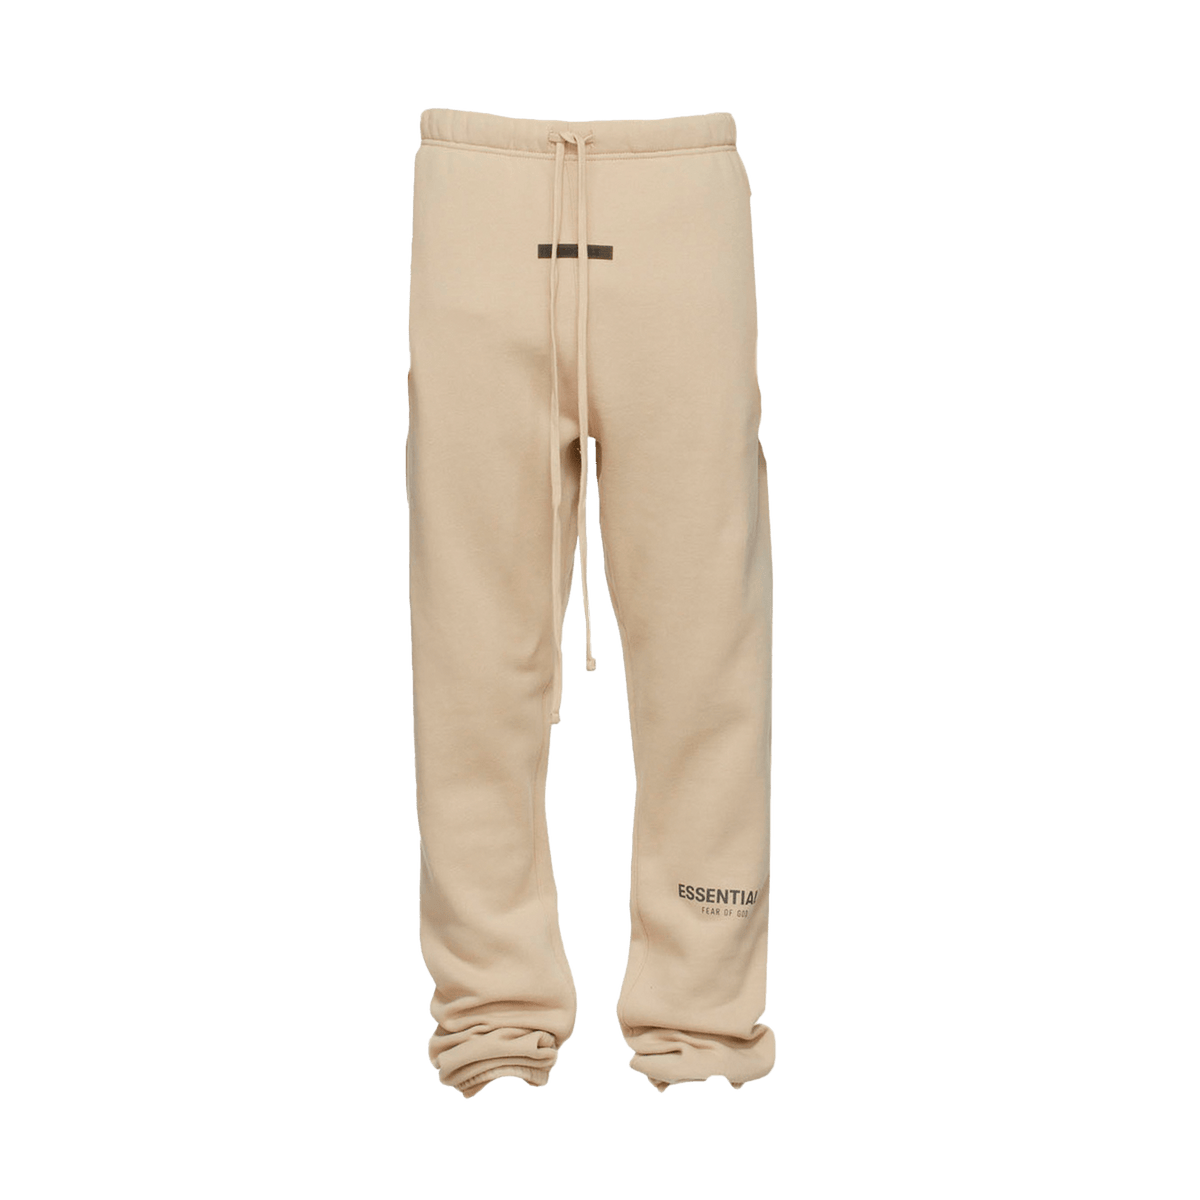 Ivy City Jogger Sweatpants in Sage Green – Ivy City Co